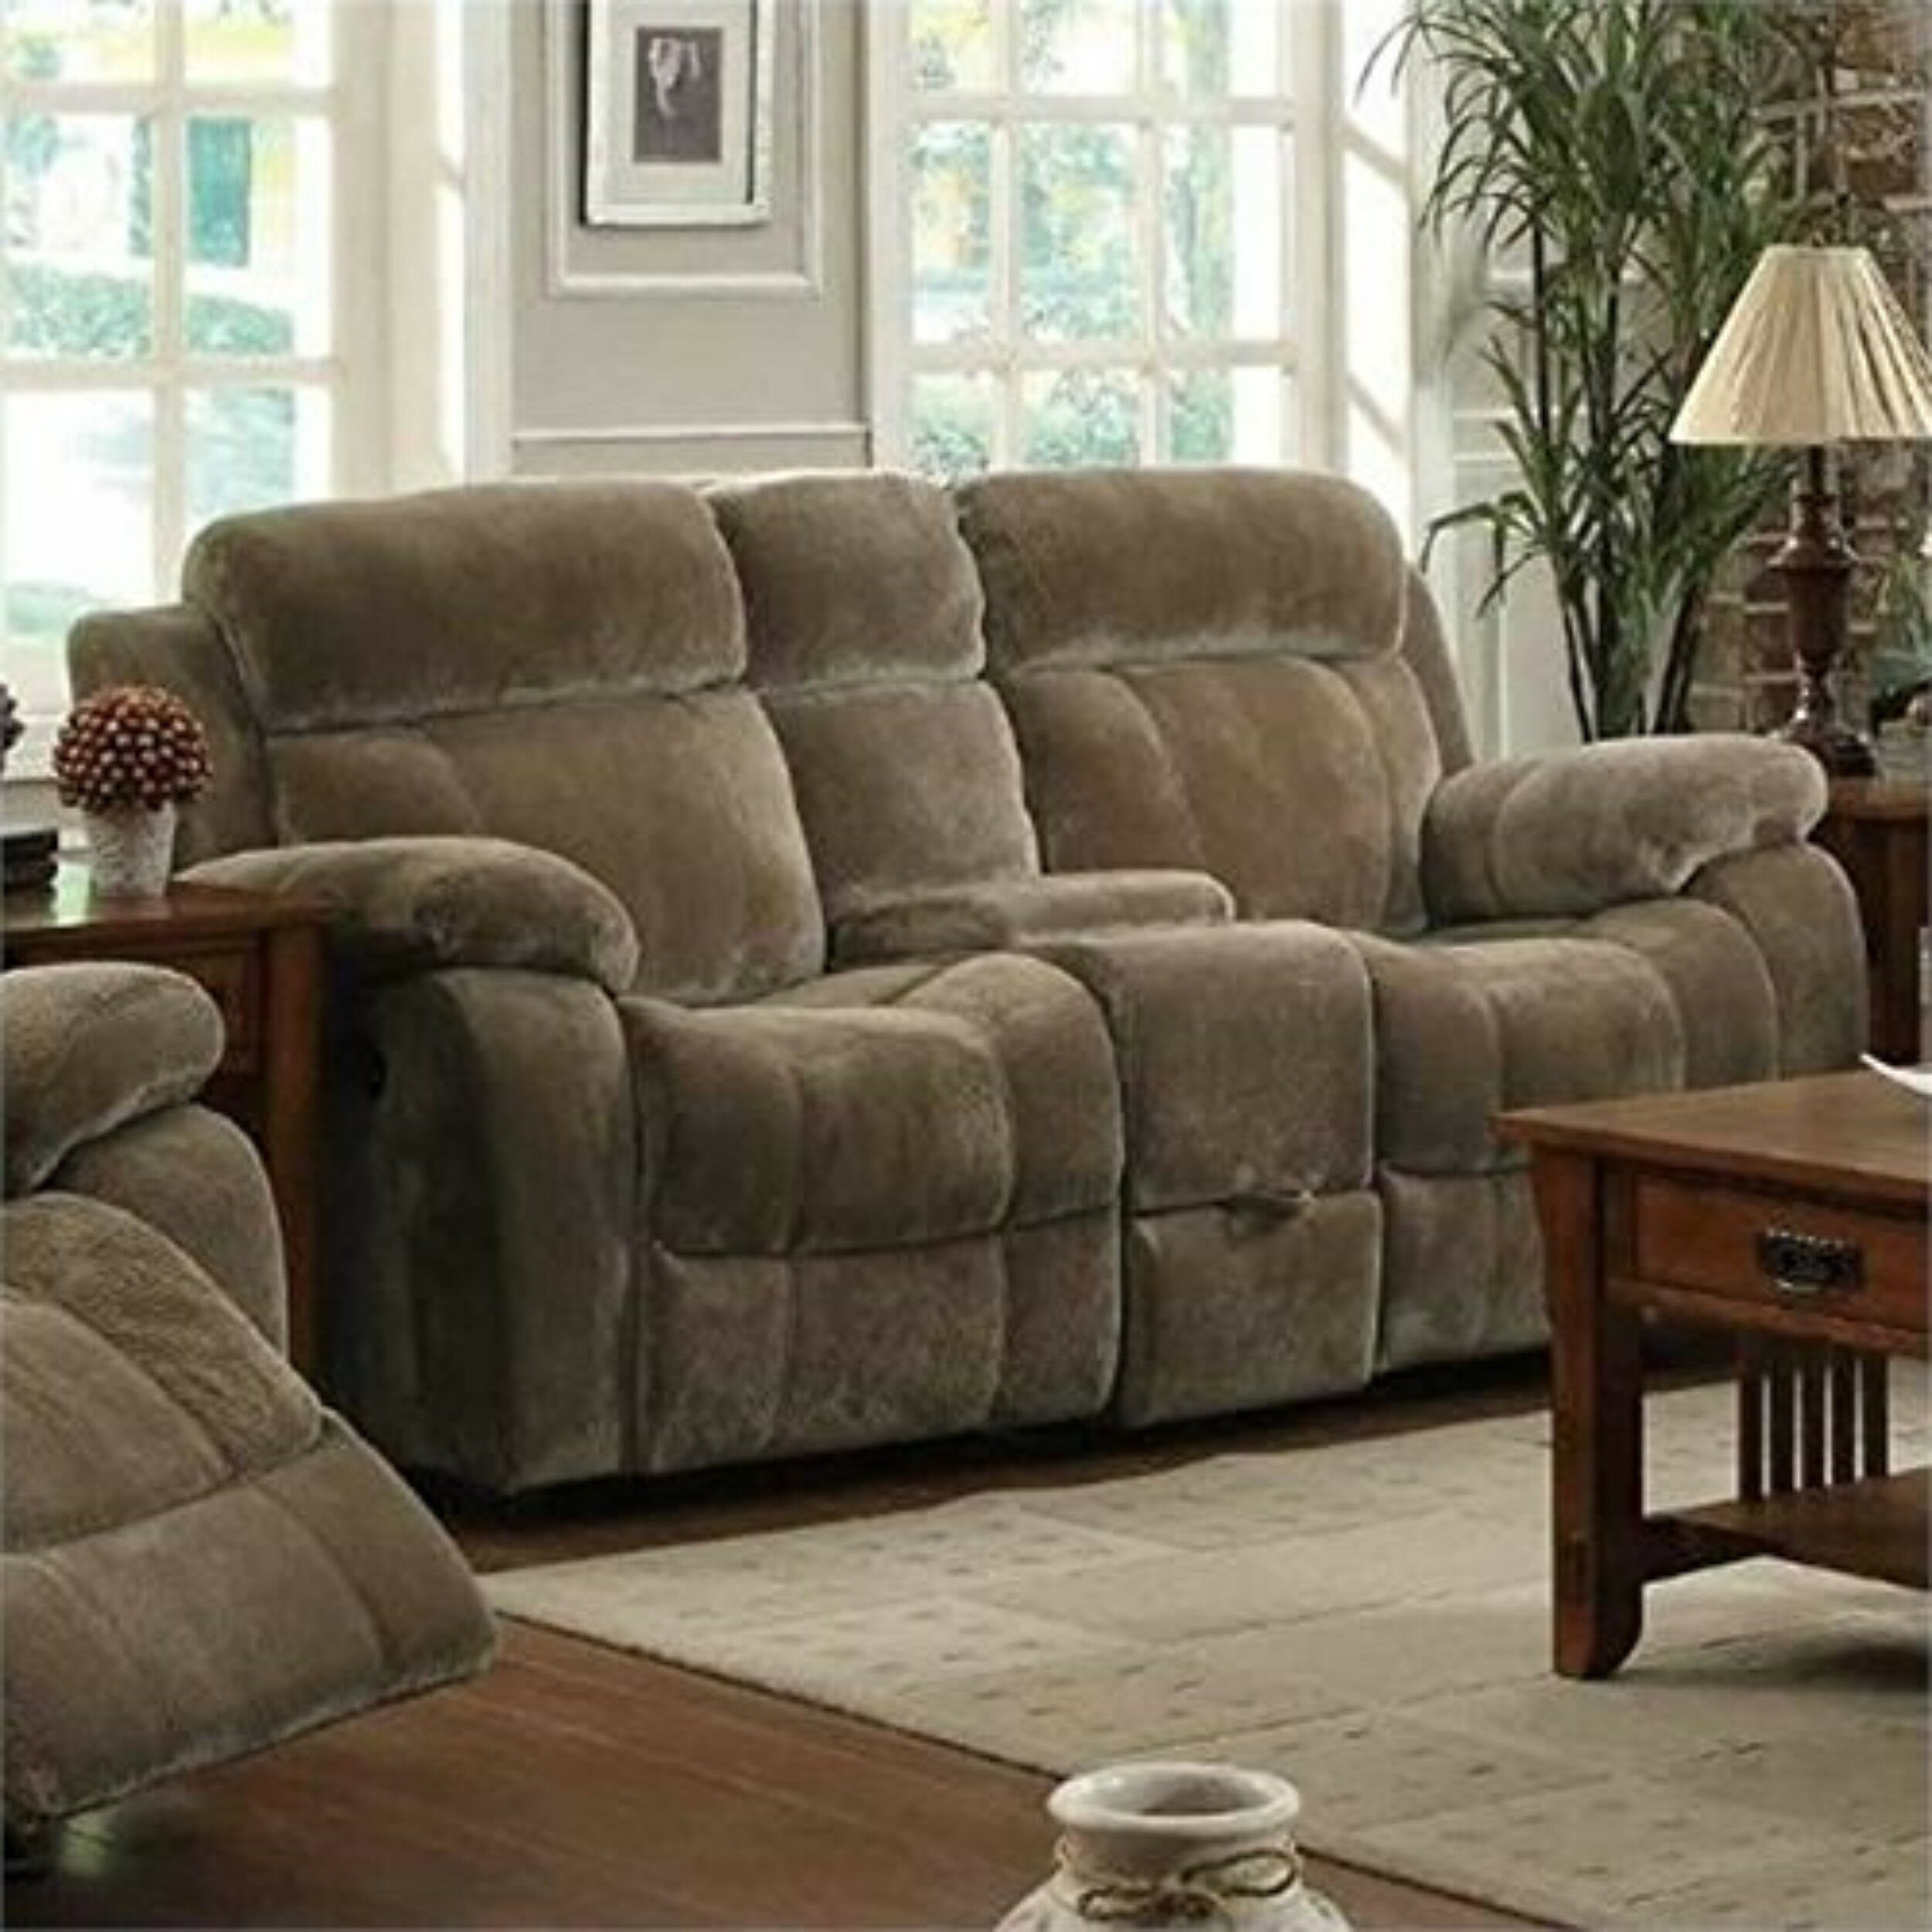 Recliner Sofa With Cup Holders - Foter